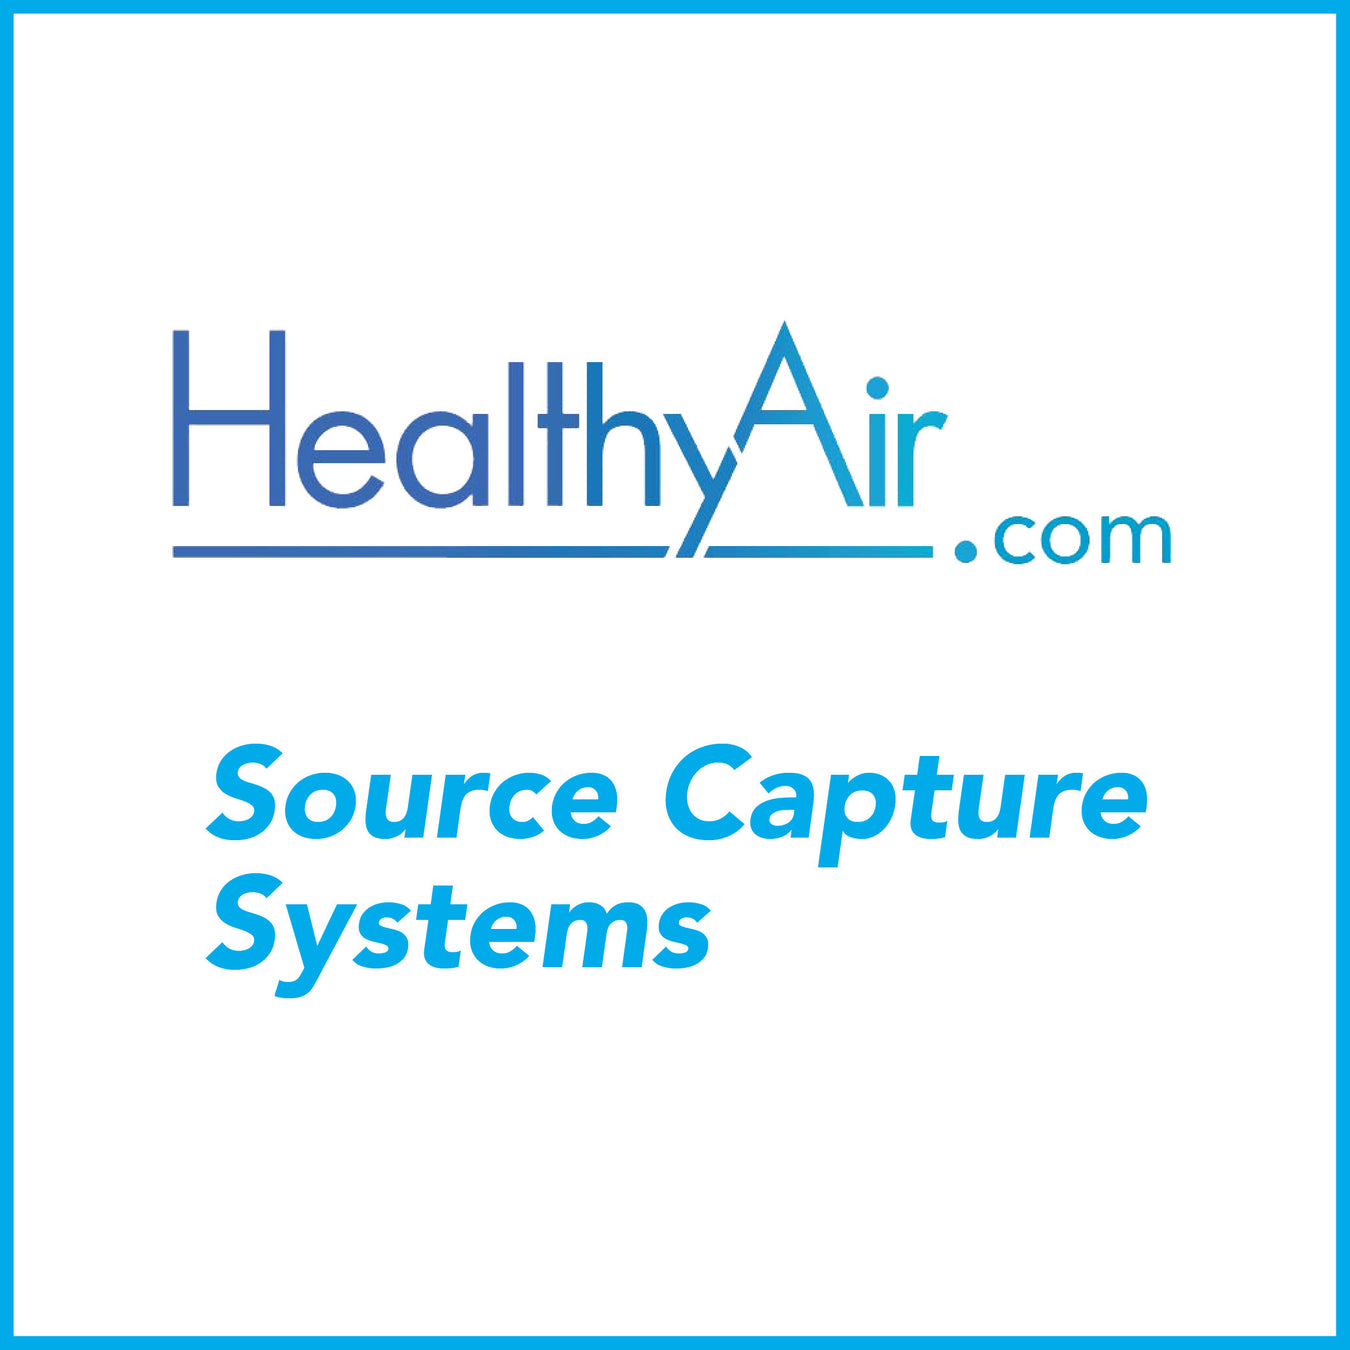 Source Capture Systems